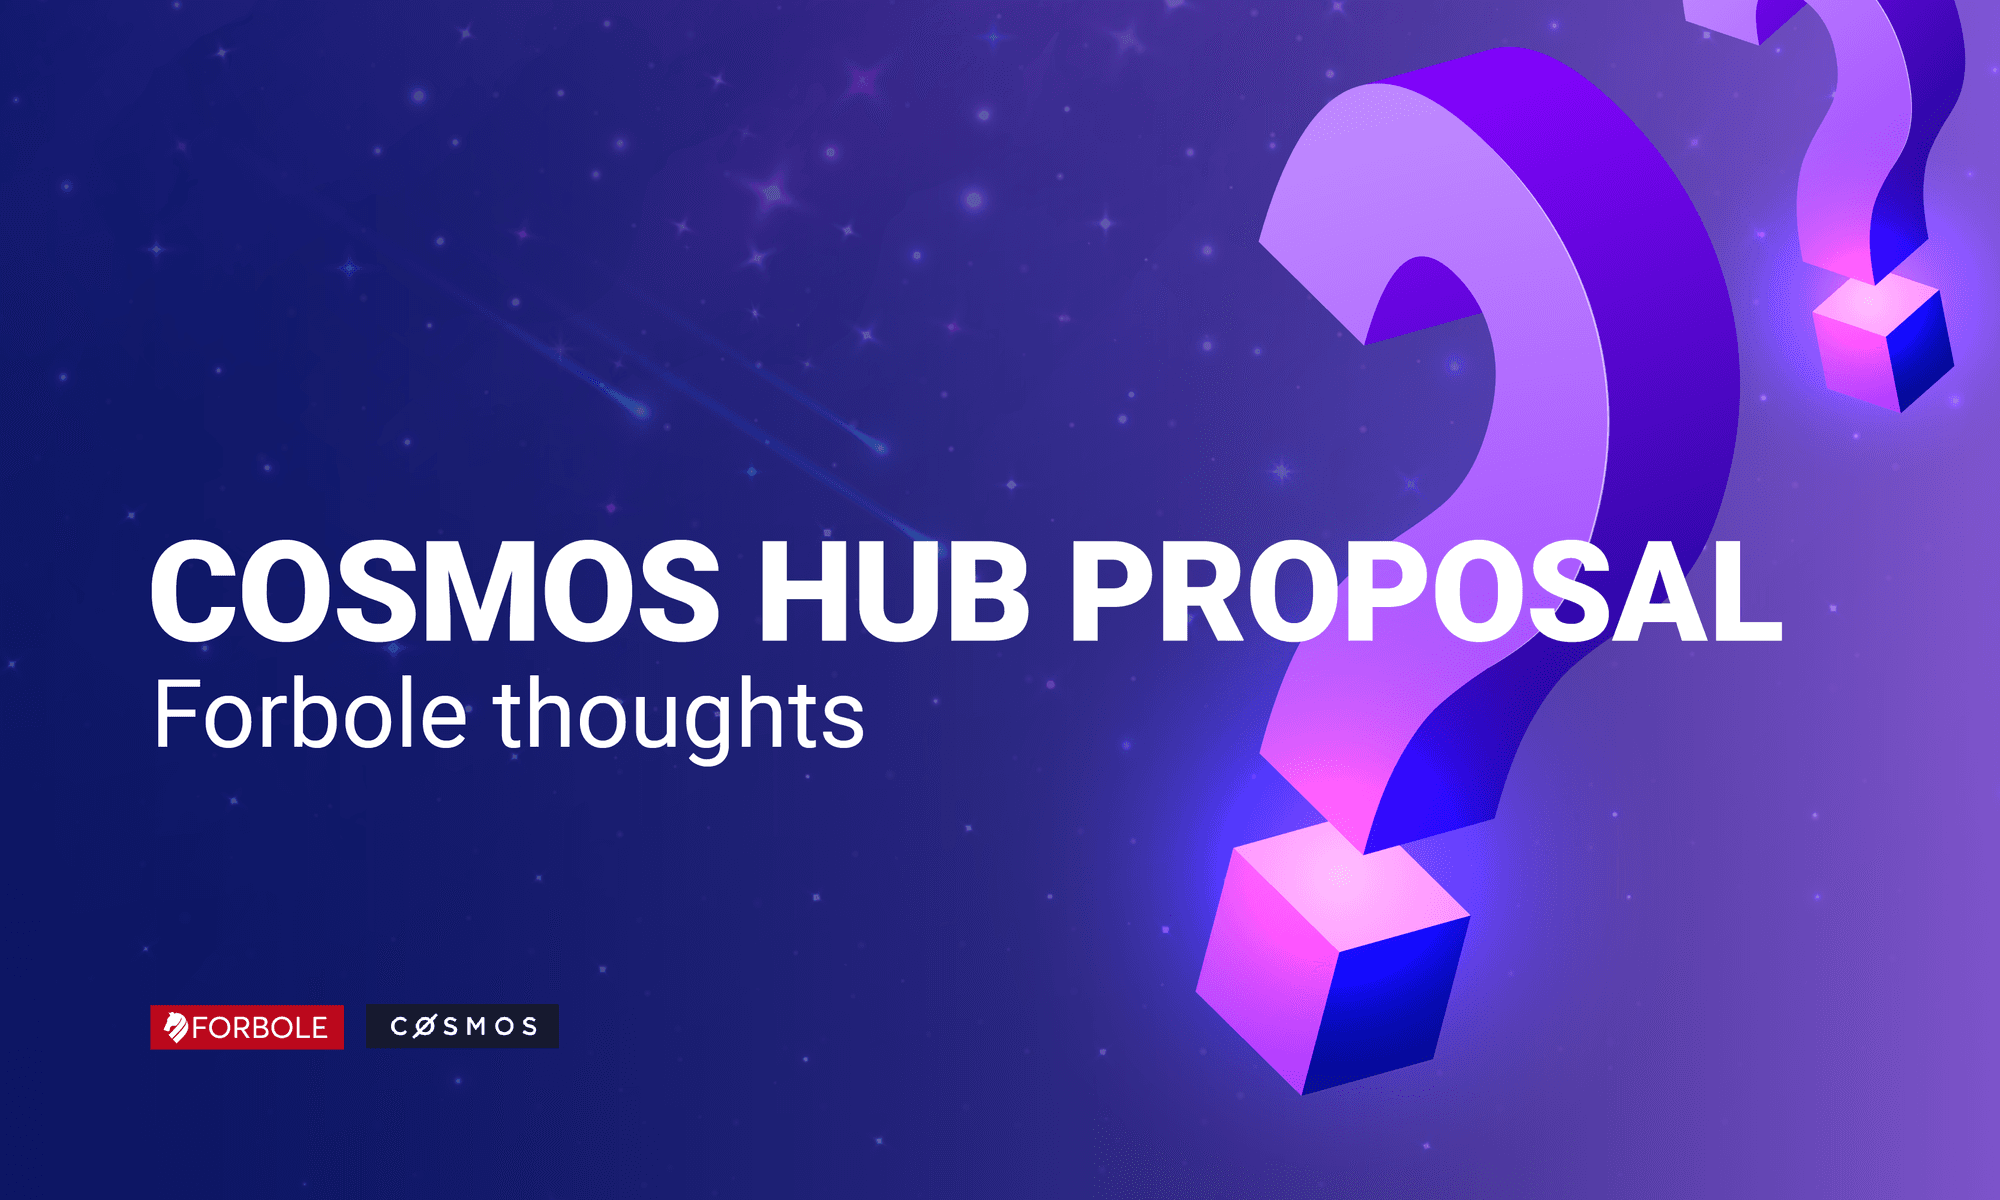 Forbole voted “No” to Proposal 23 of Cosmos Hub